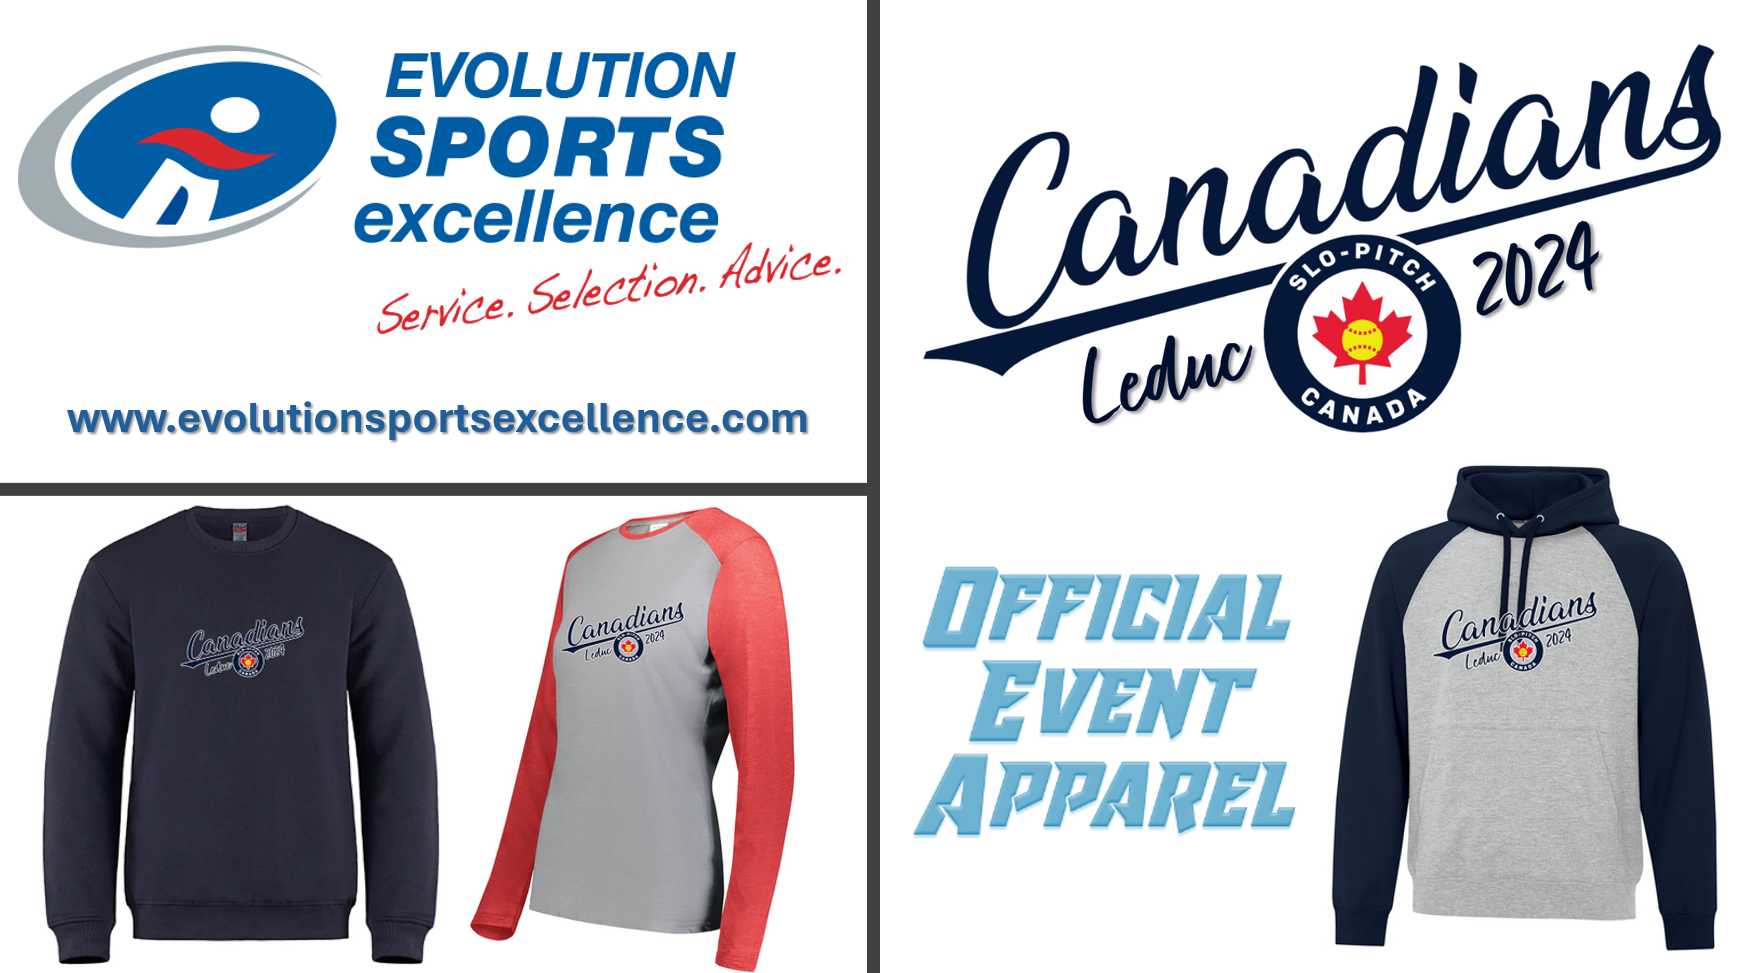 EVOLUTION SPORTS EXCELLENCE - ONLINE OFFICIAL EVENT APPAREL